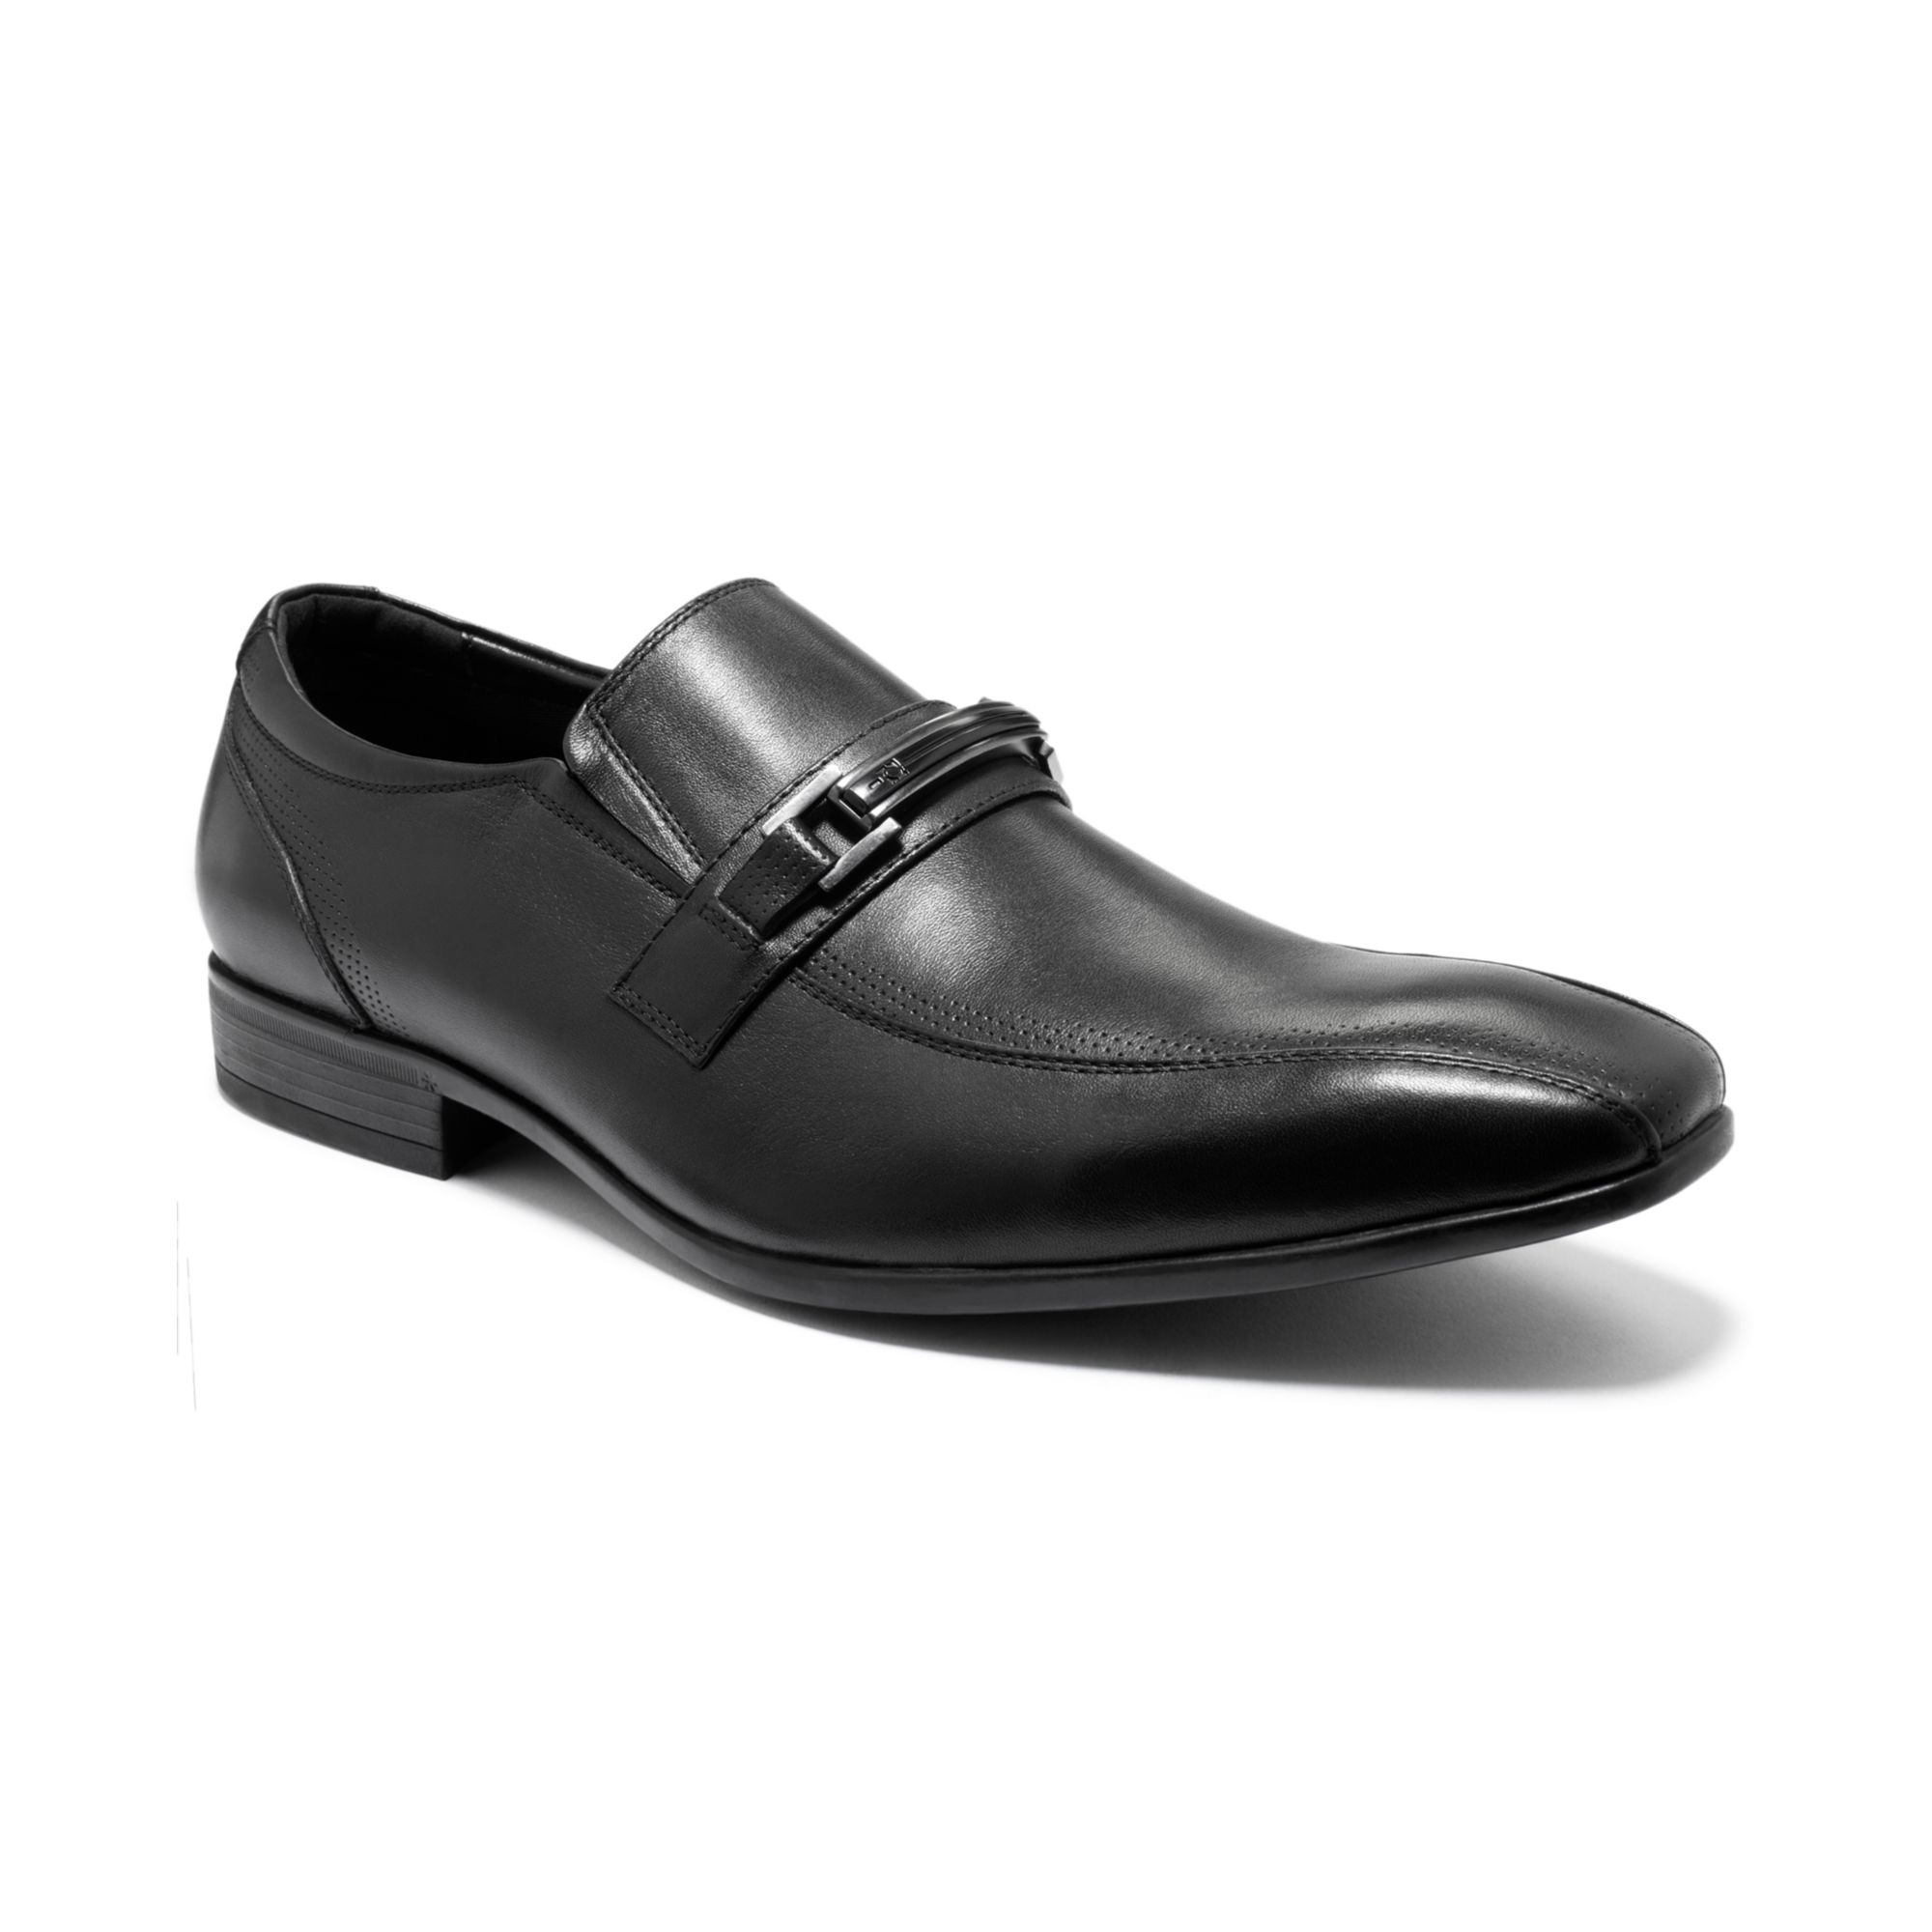 Lyst - Kenneth Cole Reaction Space Needle Bit Shoes in Black for Men